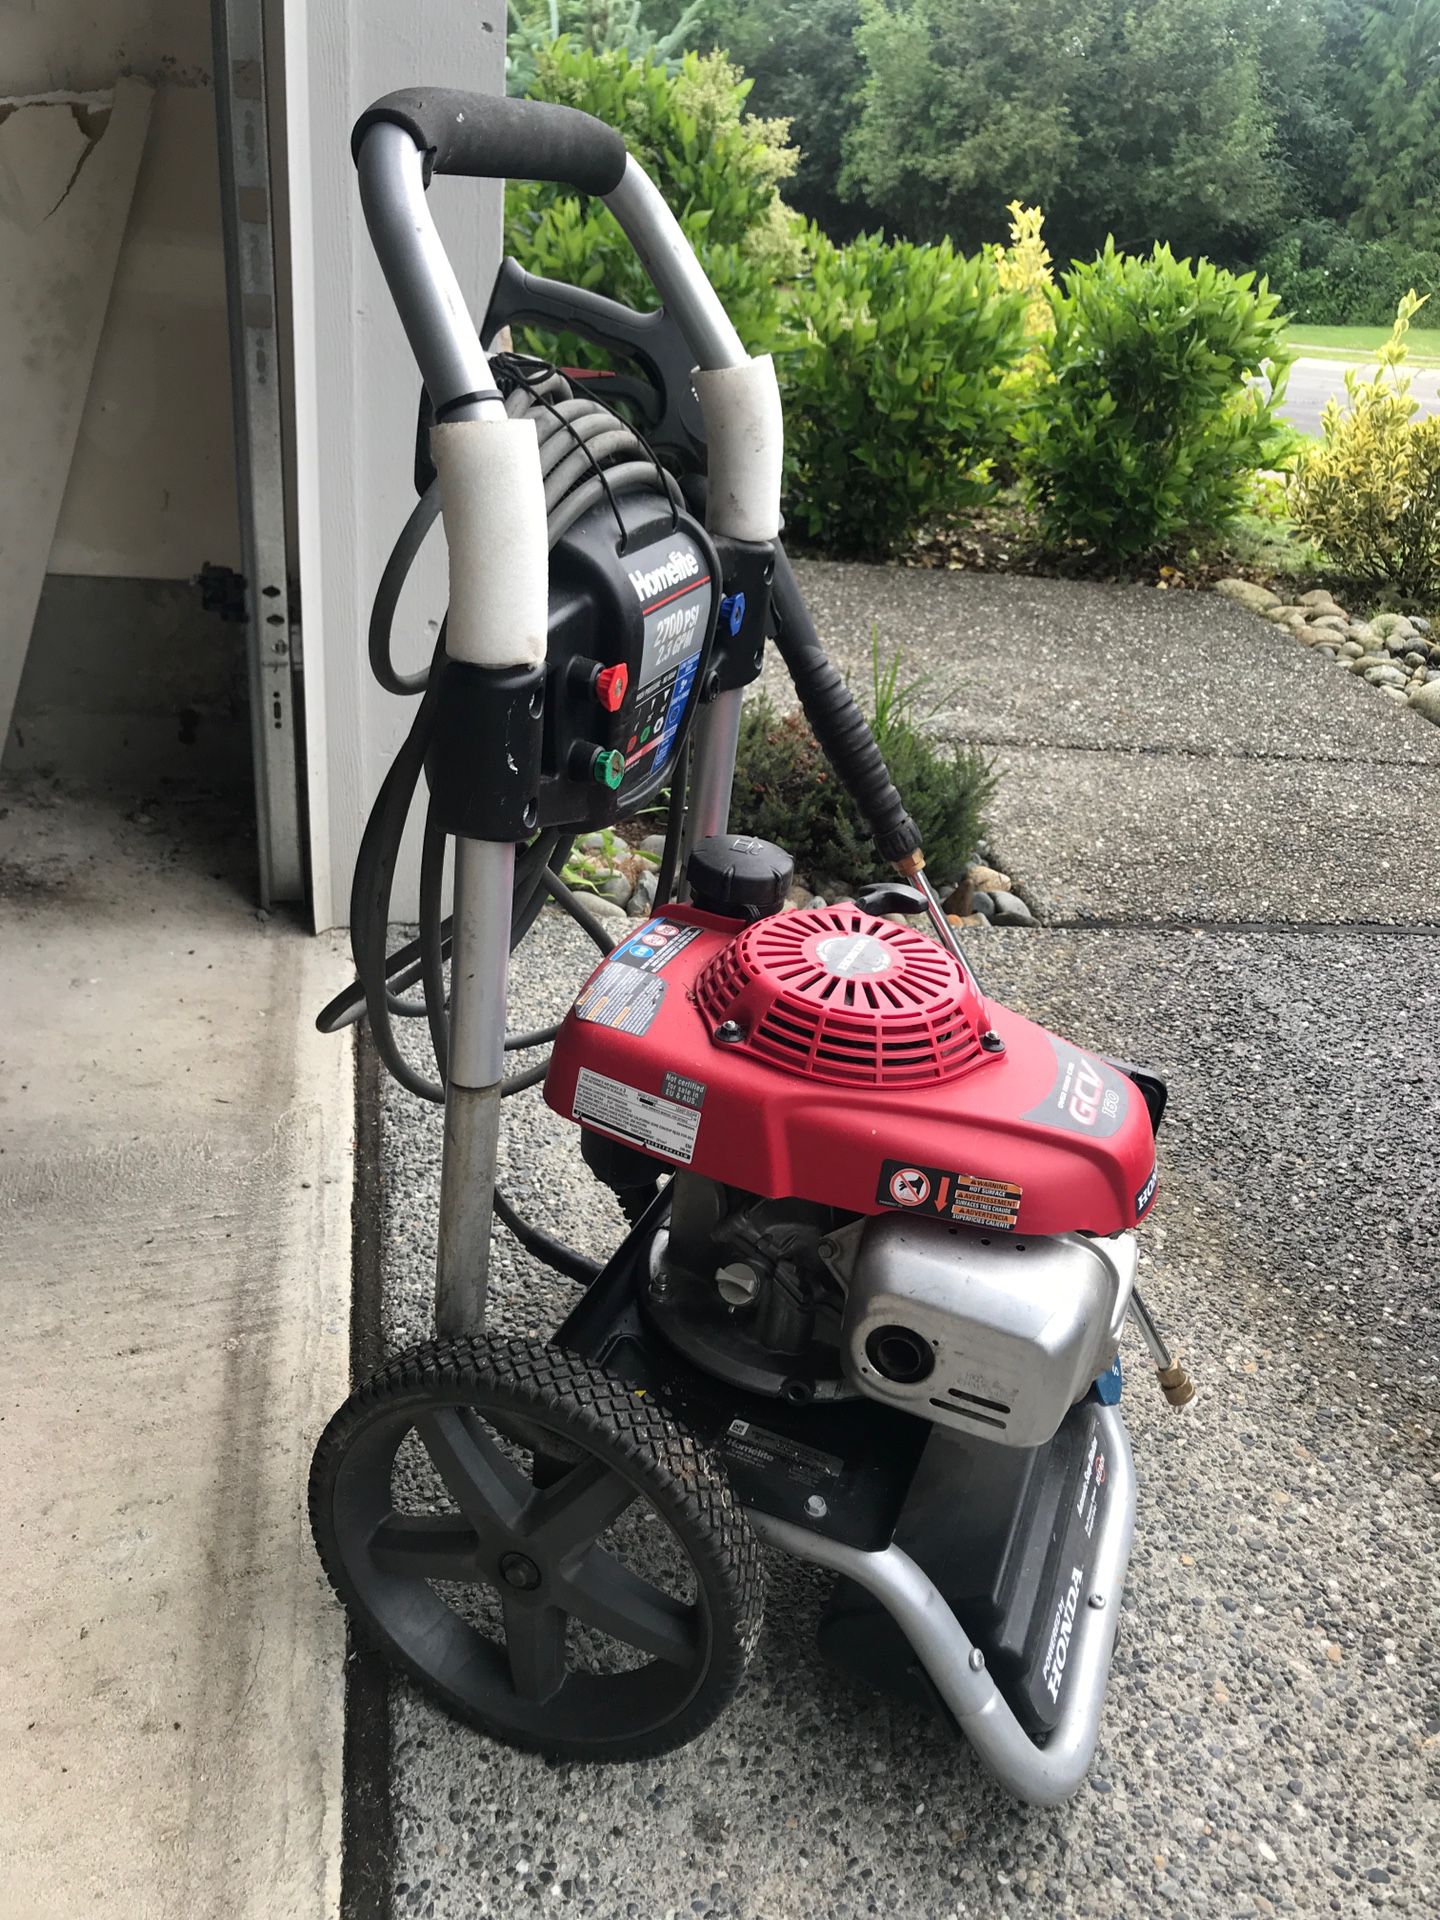 Honda pressure washer with soap dispenser and 4 different tips